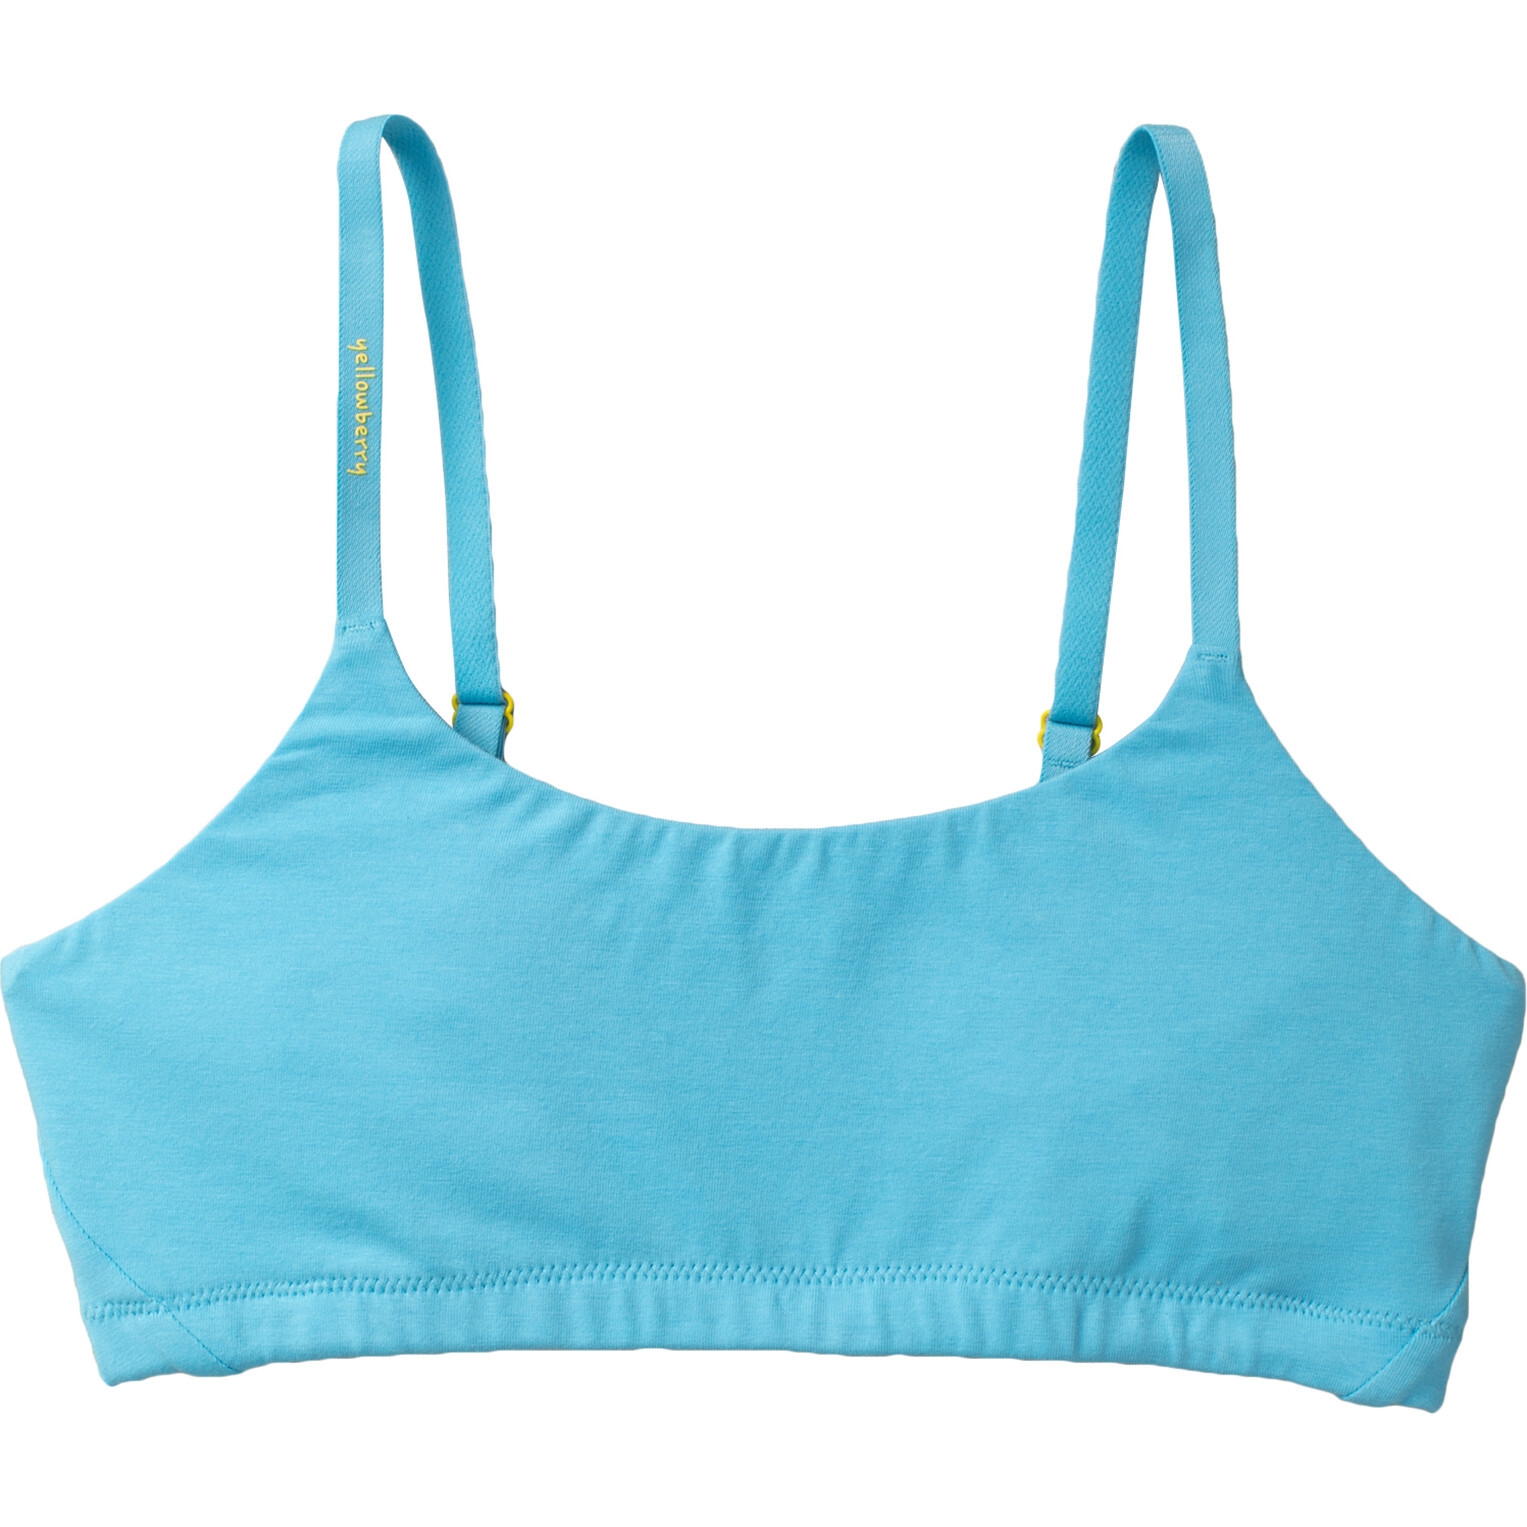 Age For a Training Bra - Yellowberry